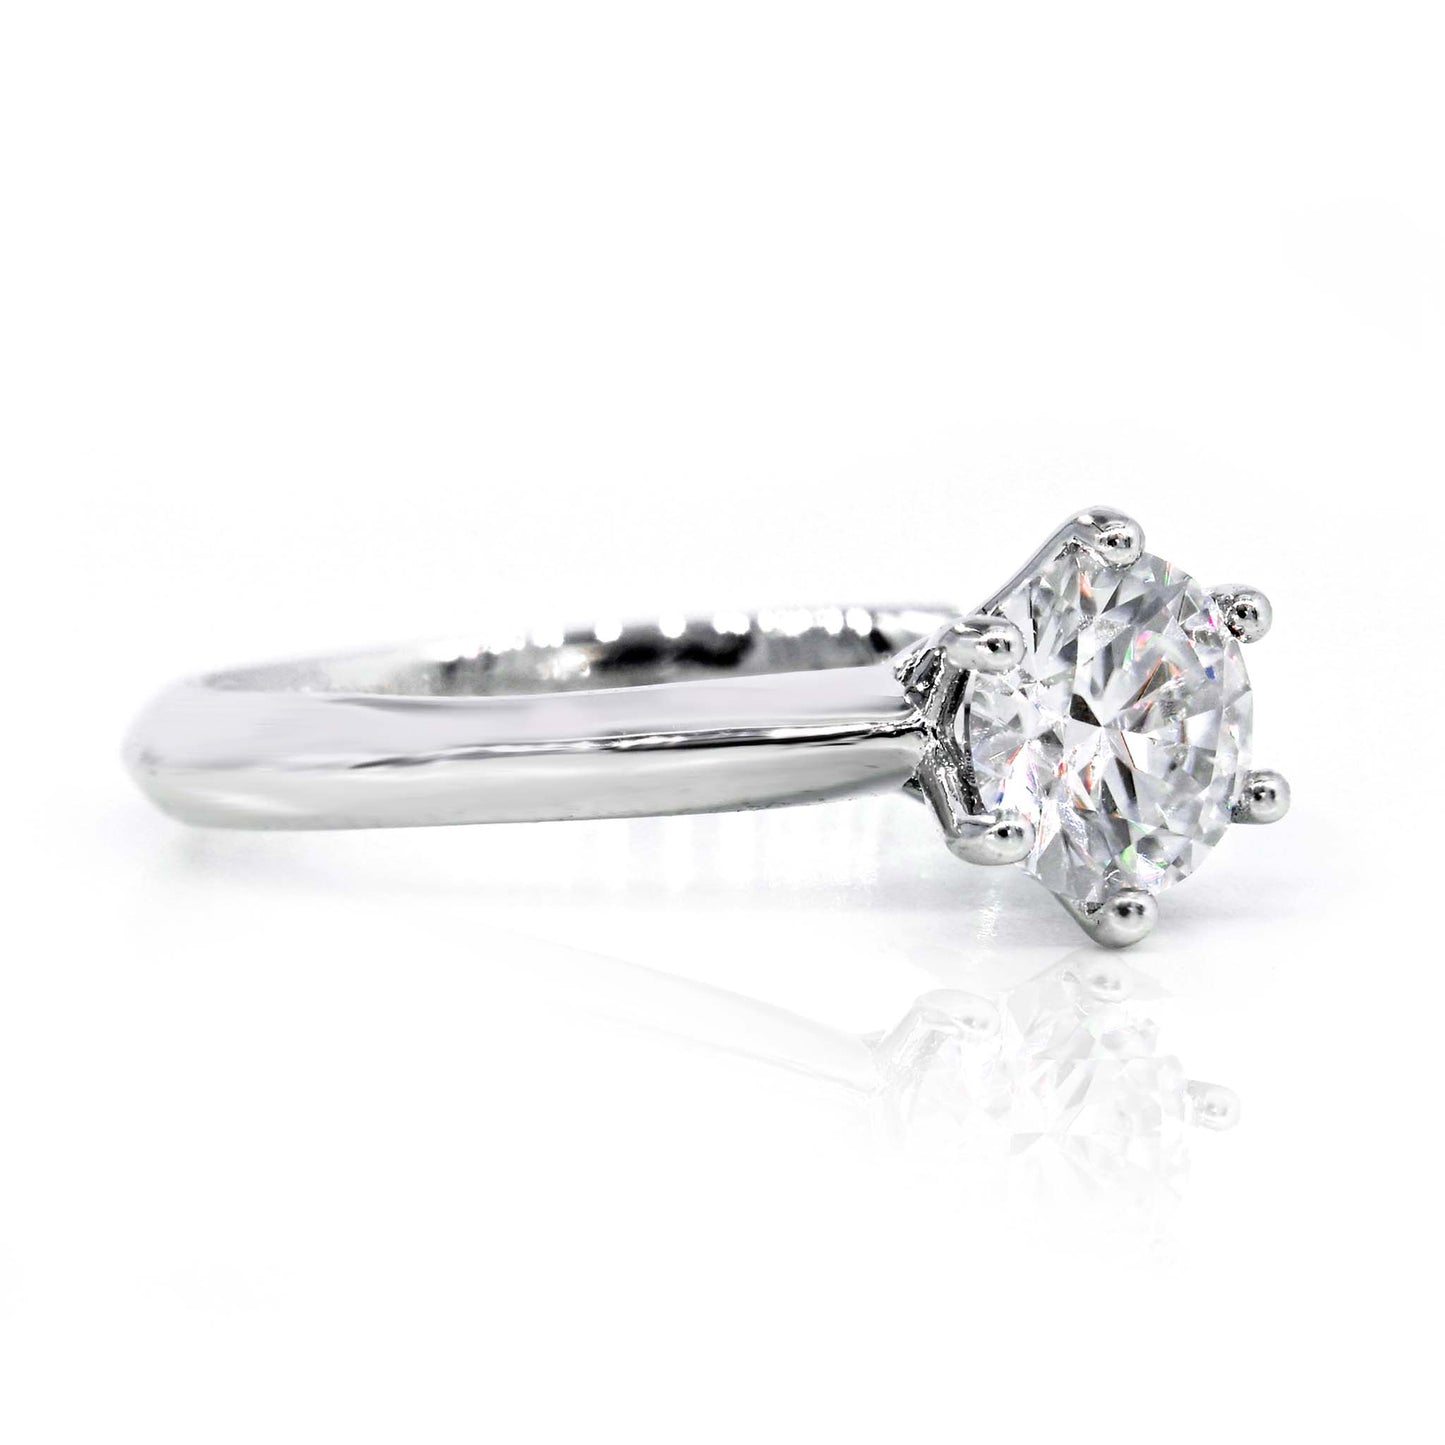 A 1.00 carat moissanite engagement ring available in Chiang Mai, Thailand